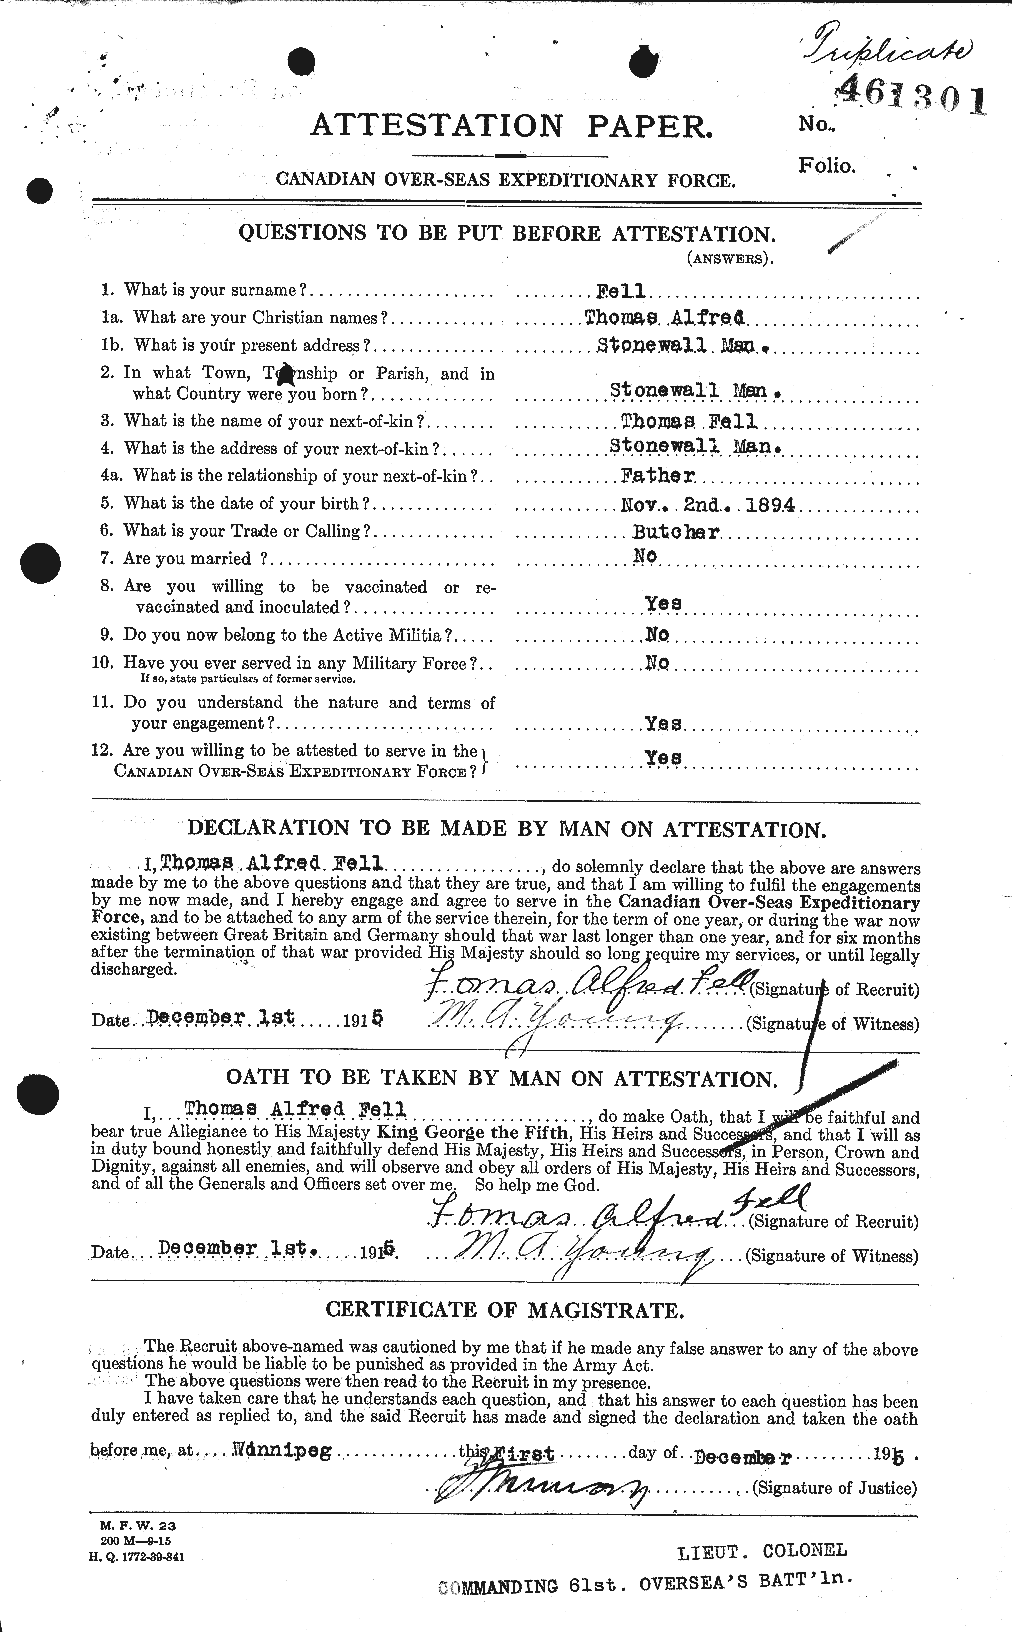 Personnel Records of the First World War - CEF 321930a